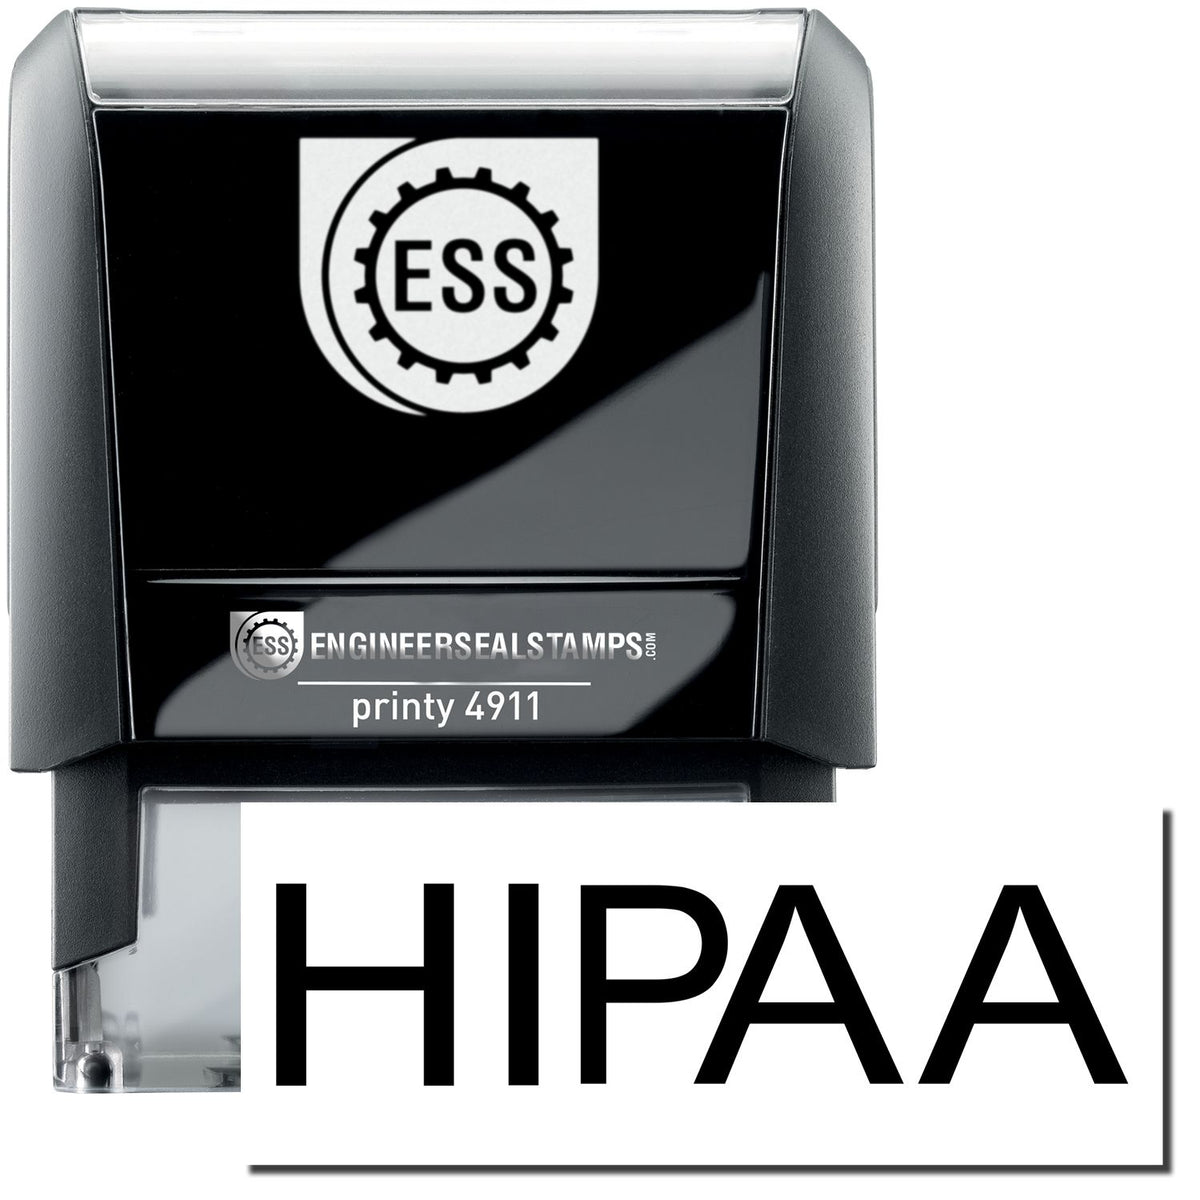 A self-inking stamp with a stamped image showing how the text &quot;HIPAA&quot; is displayed after stamping.